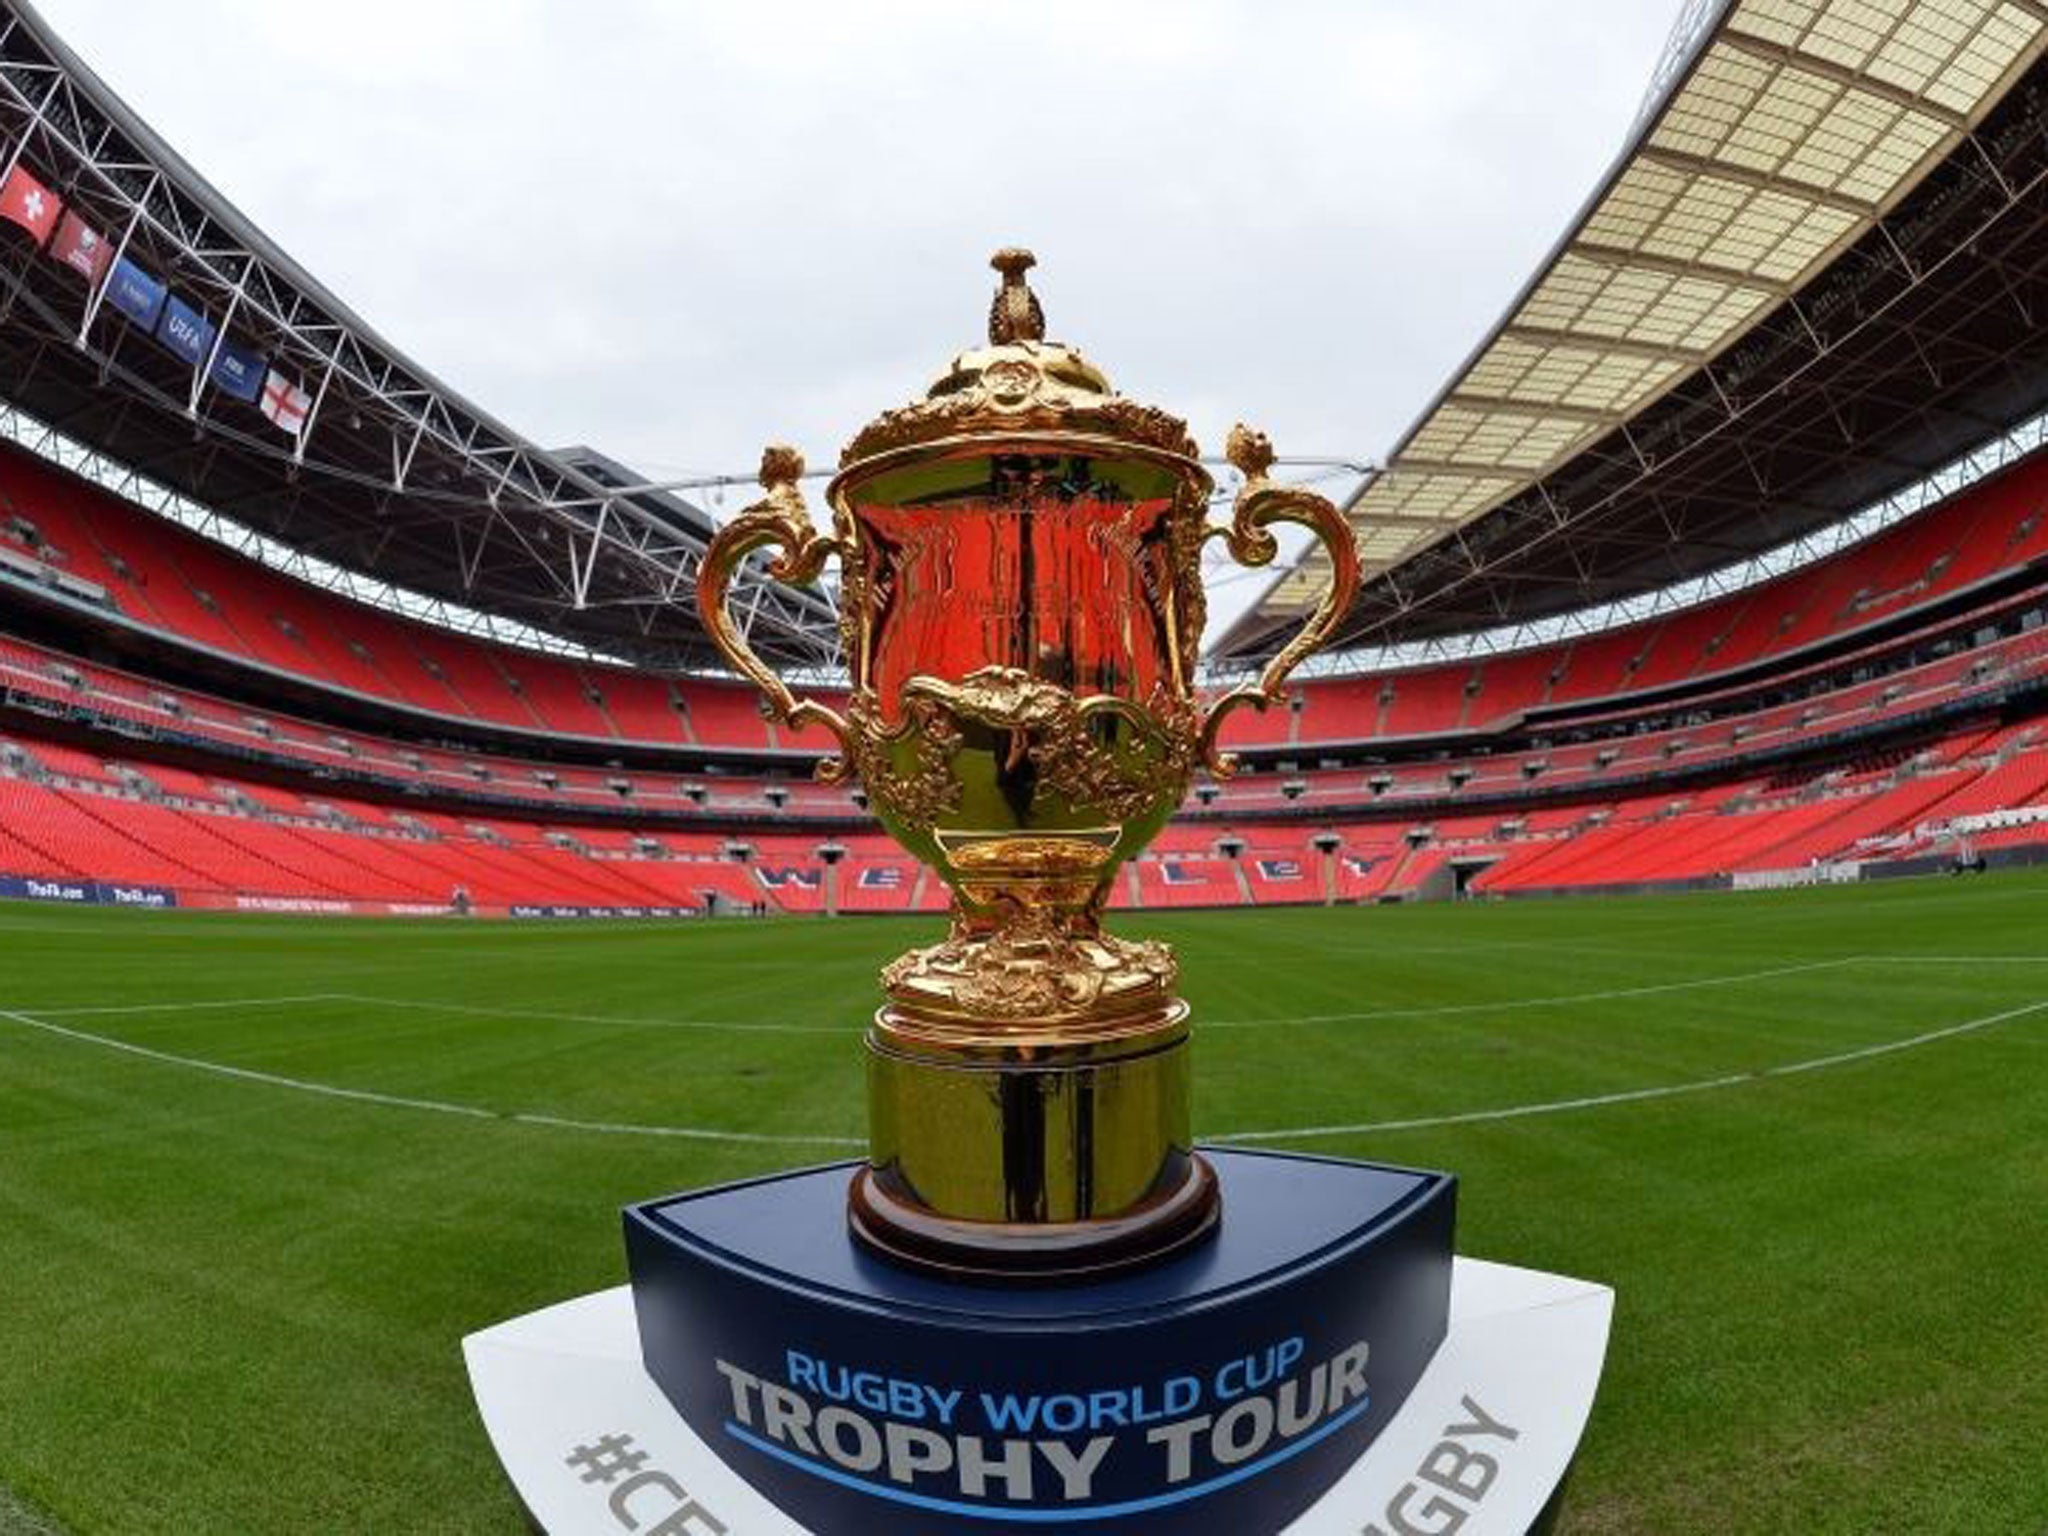 Magnet to rugby supporters: the Webb Ellis Cup is up for grabs this autumn and residents of a number of cities could make money renting out property to fans from around the globe